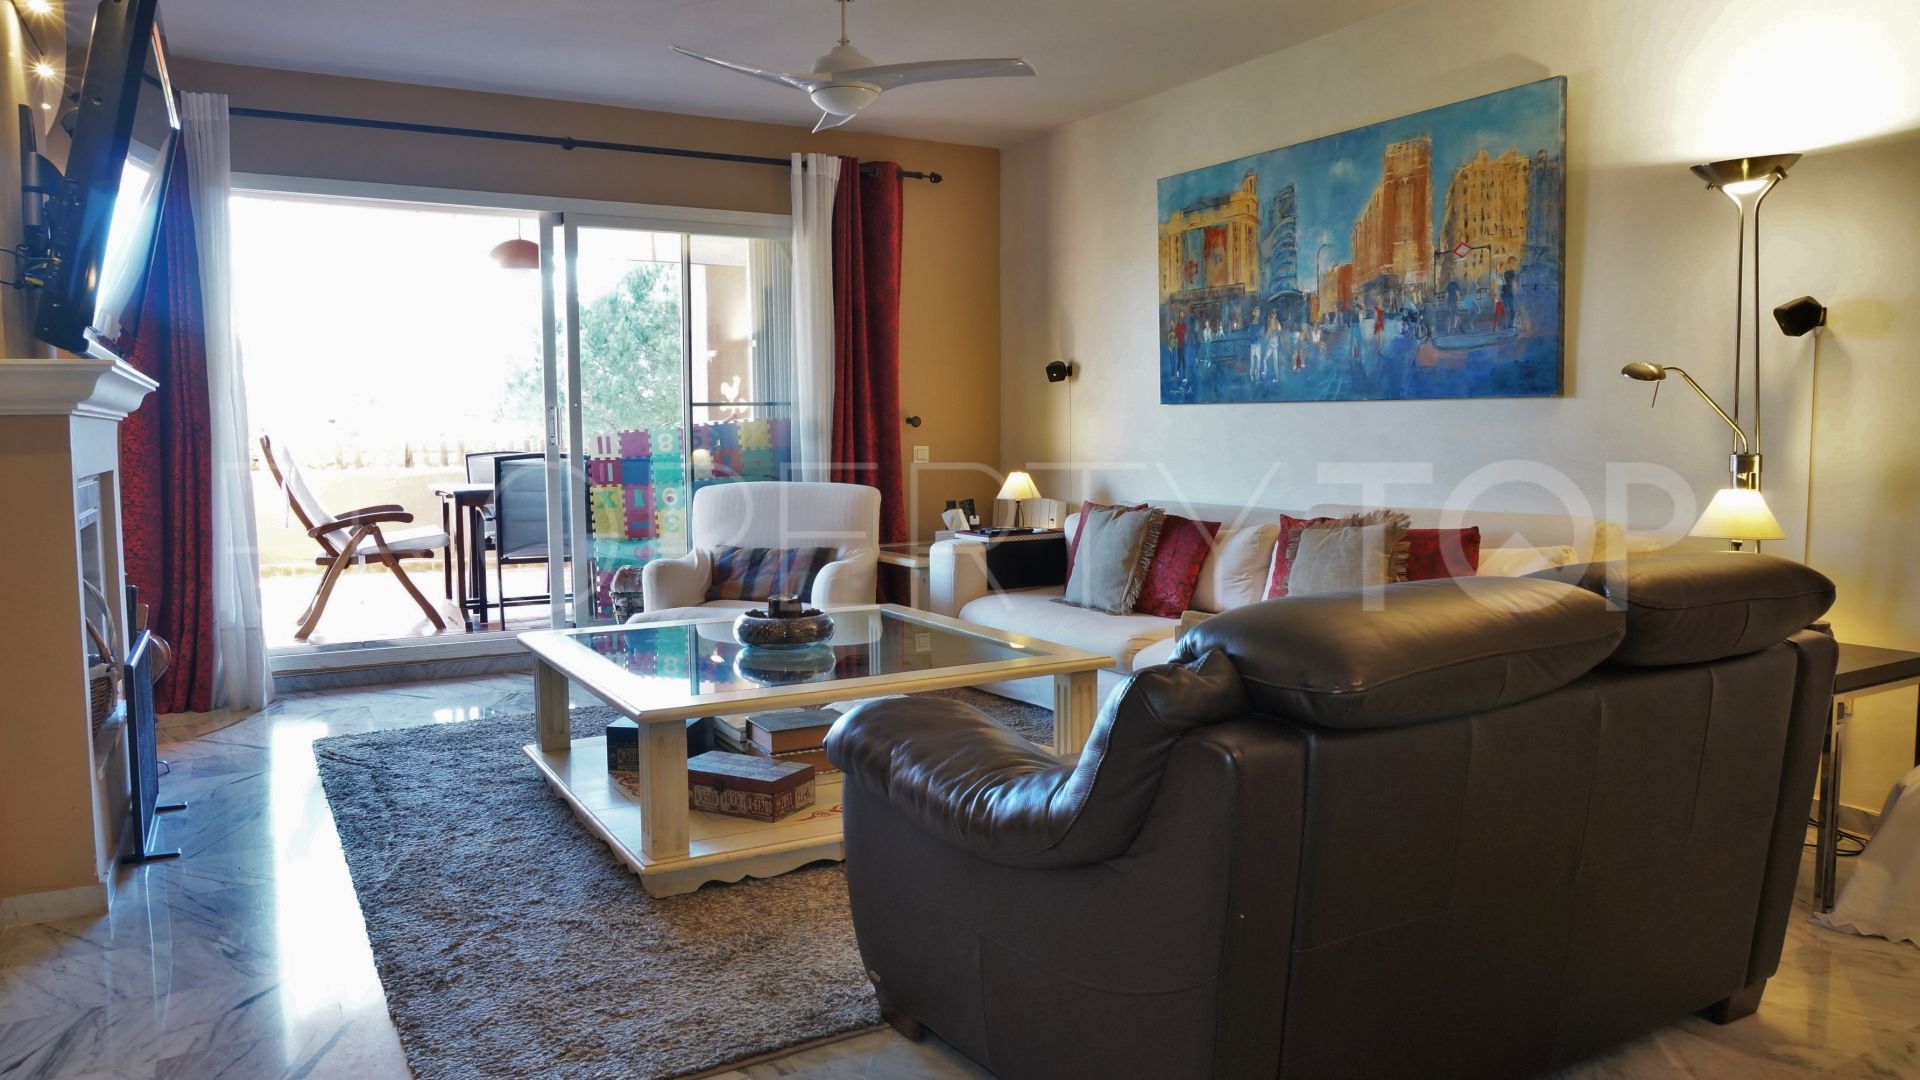 For sale apartment in Alhambra del Golf with 3 bedrooms